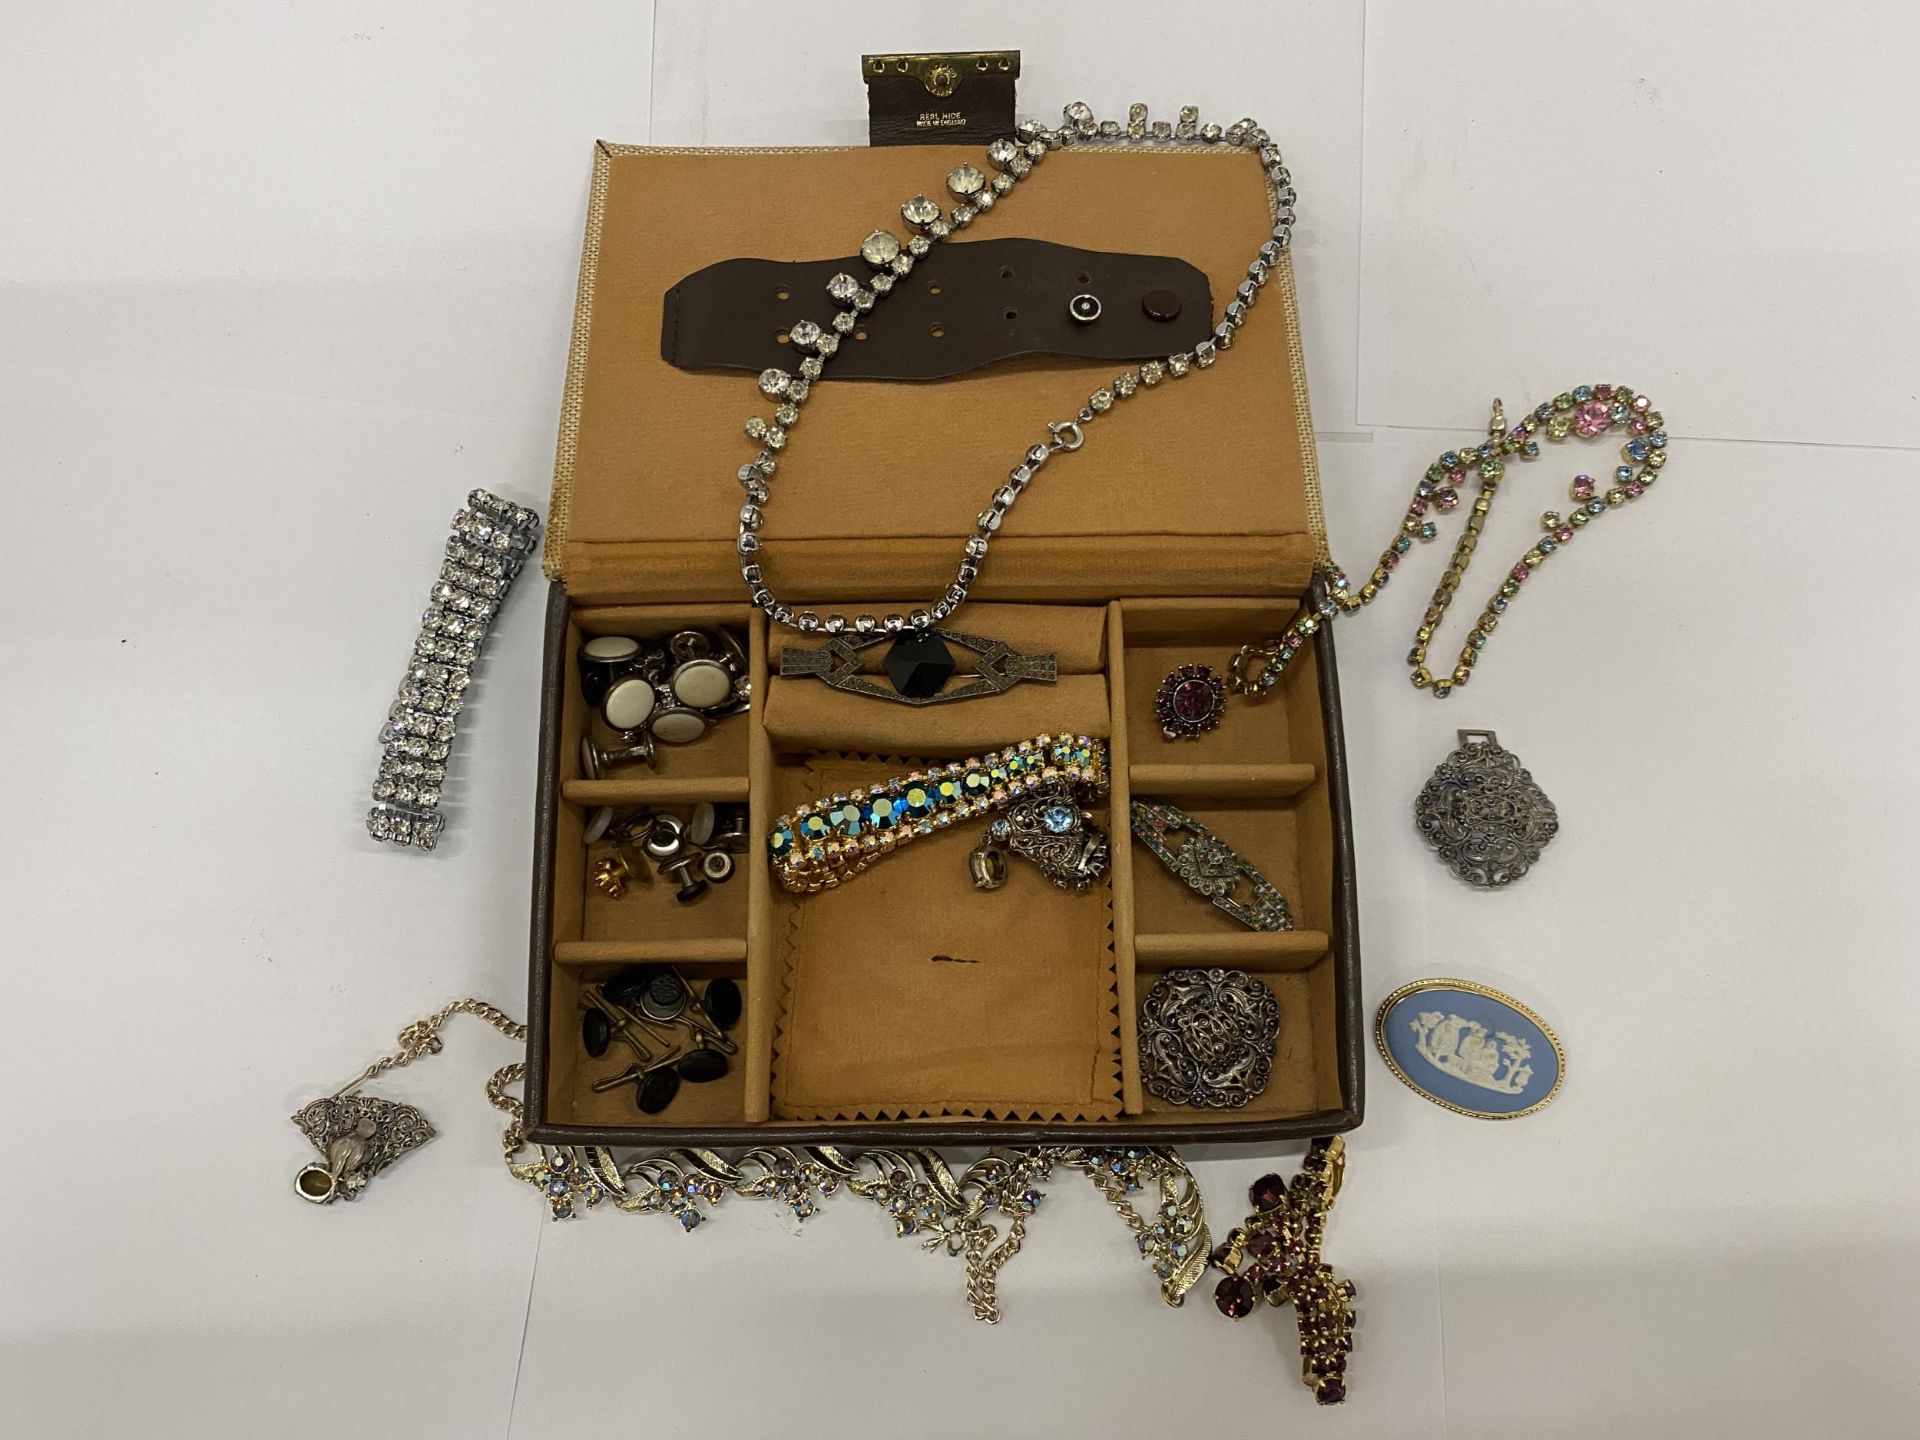 A QUANTITY OF COSTUME JEWELLERY TO INCLUDE BRACELETS, NECKLACES, BROOCHES, STUDS, ETC IN A BOX